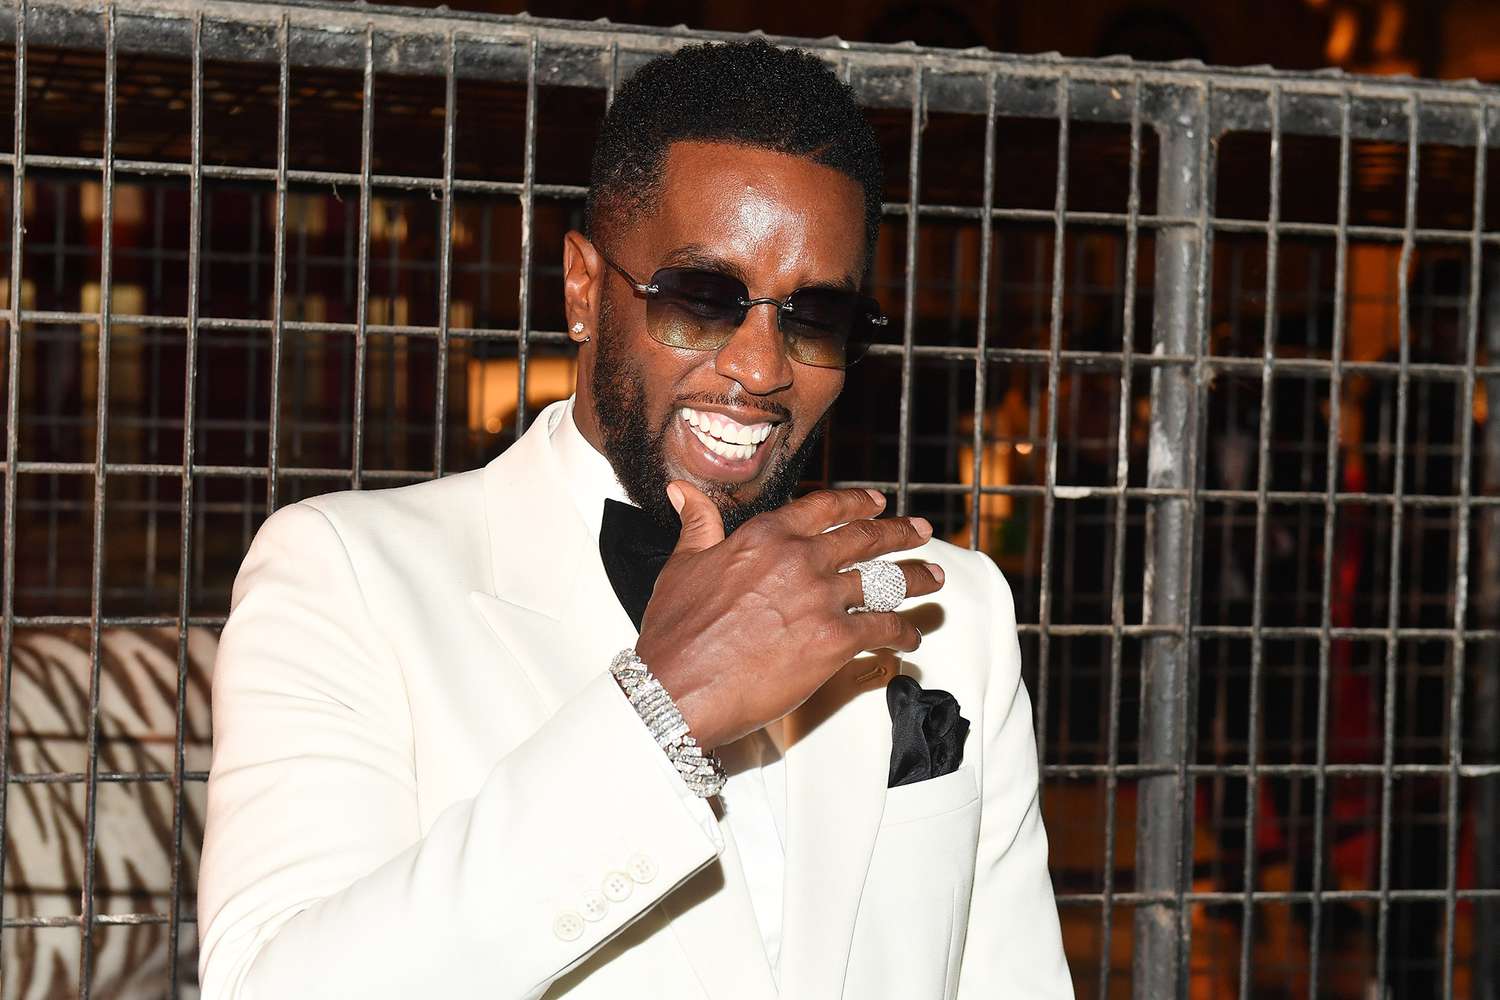 Sean "Diddy" Combs attends Black Tie Affair For Quality Control's CEO Pierre "Pee" Thomas at Fox Theater on June 02, 2021 in Atlanta